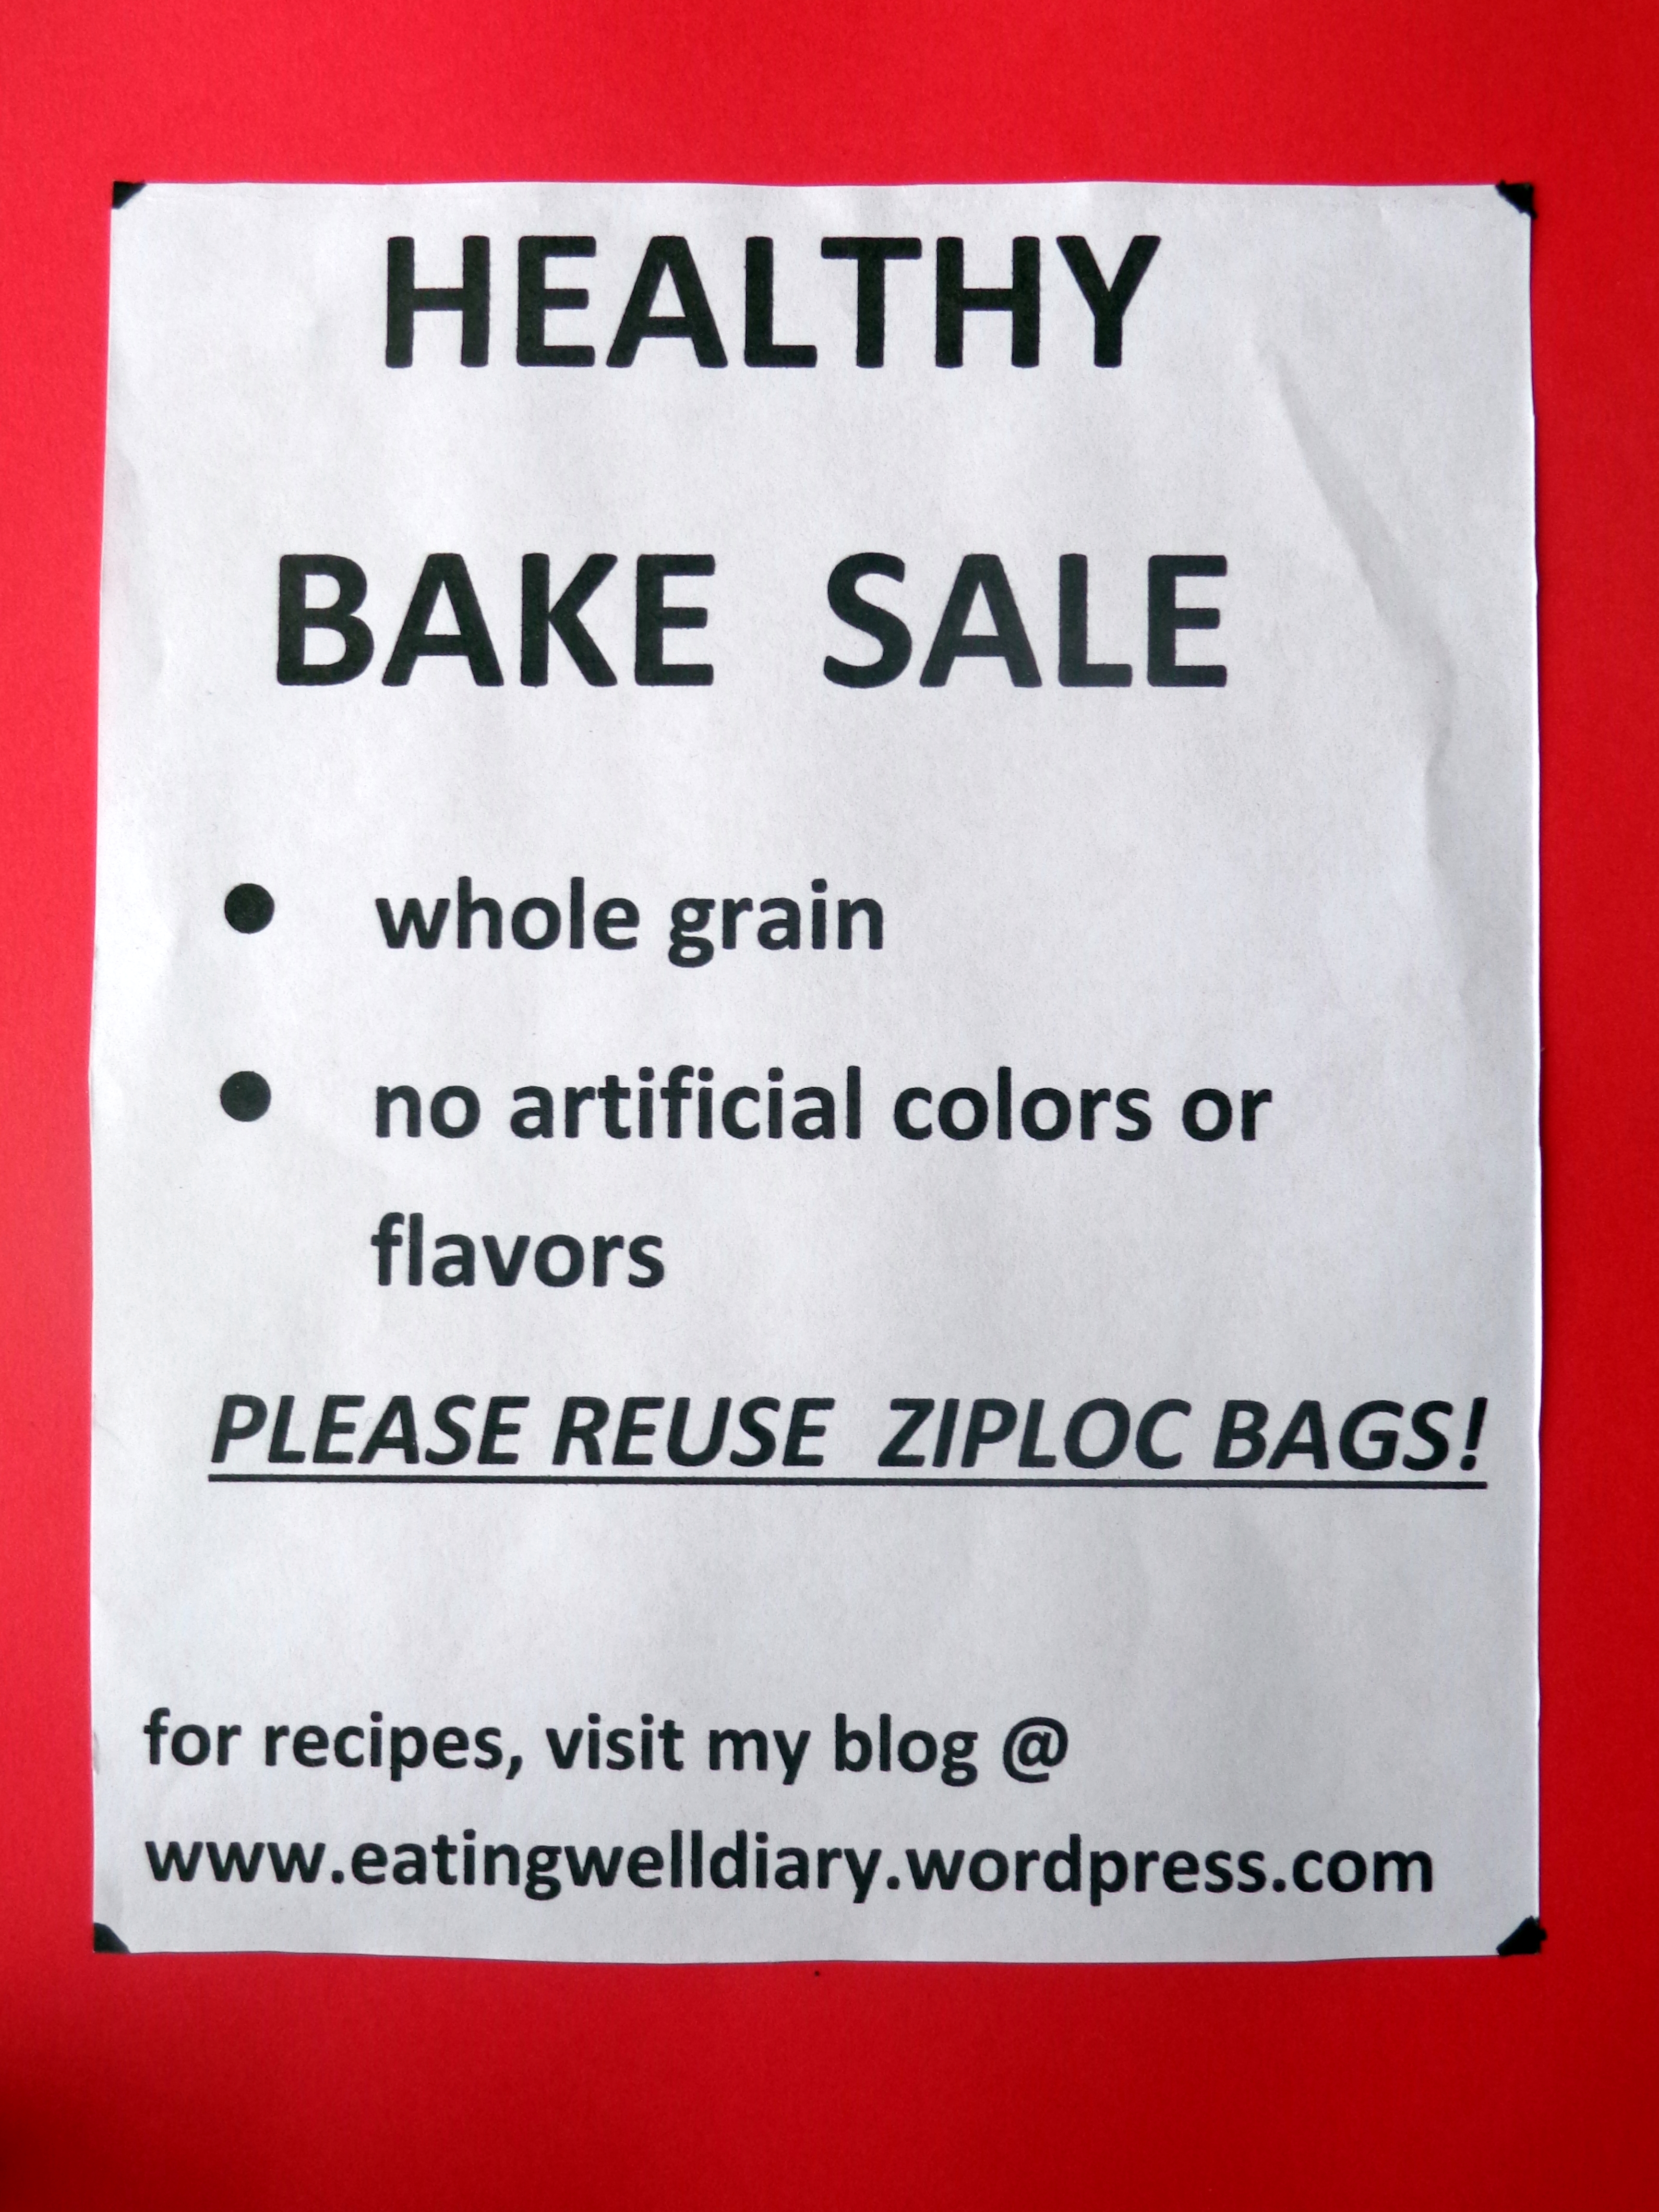 Bake Sale at a school fundraiser event